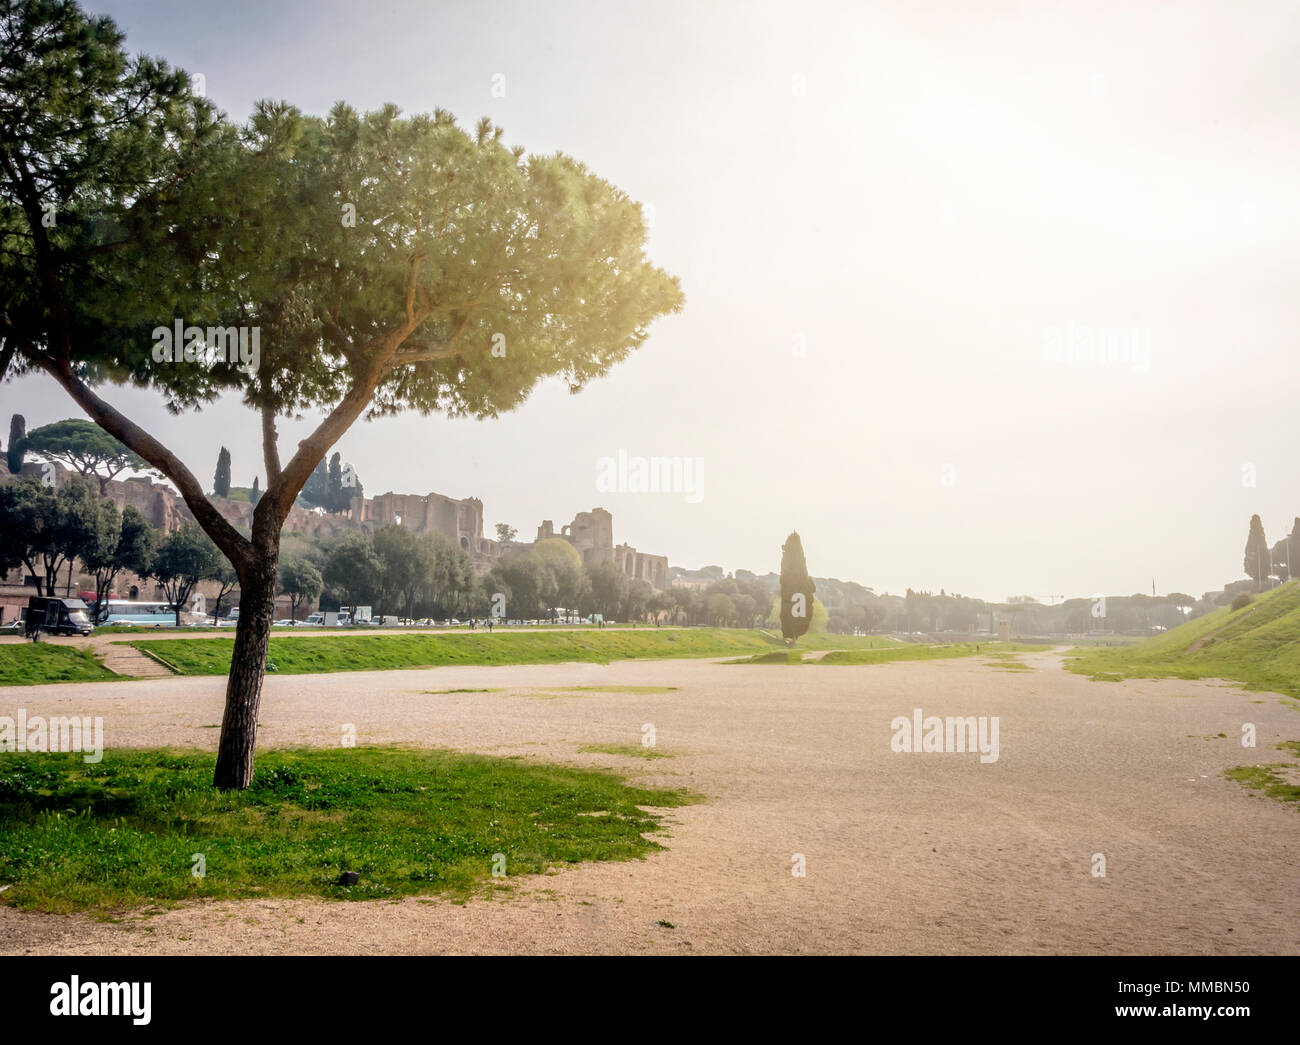 The remains of the famous Circus Maximus of Rome with the famous Roman pine trees and a cypress tree in the background. Back light on a cloudy day Stock Photo